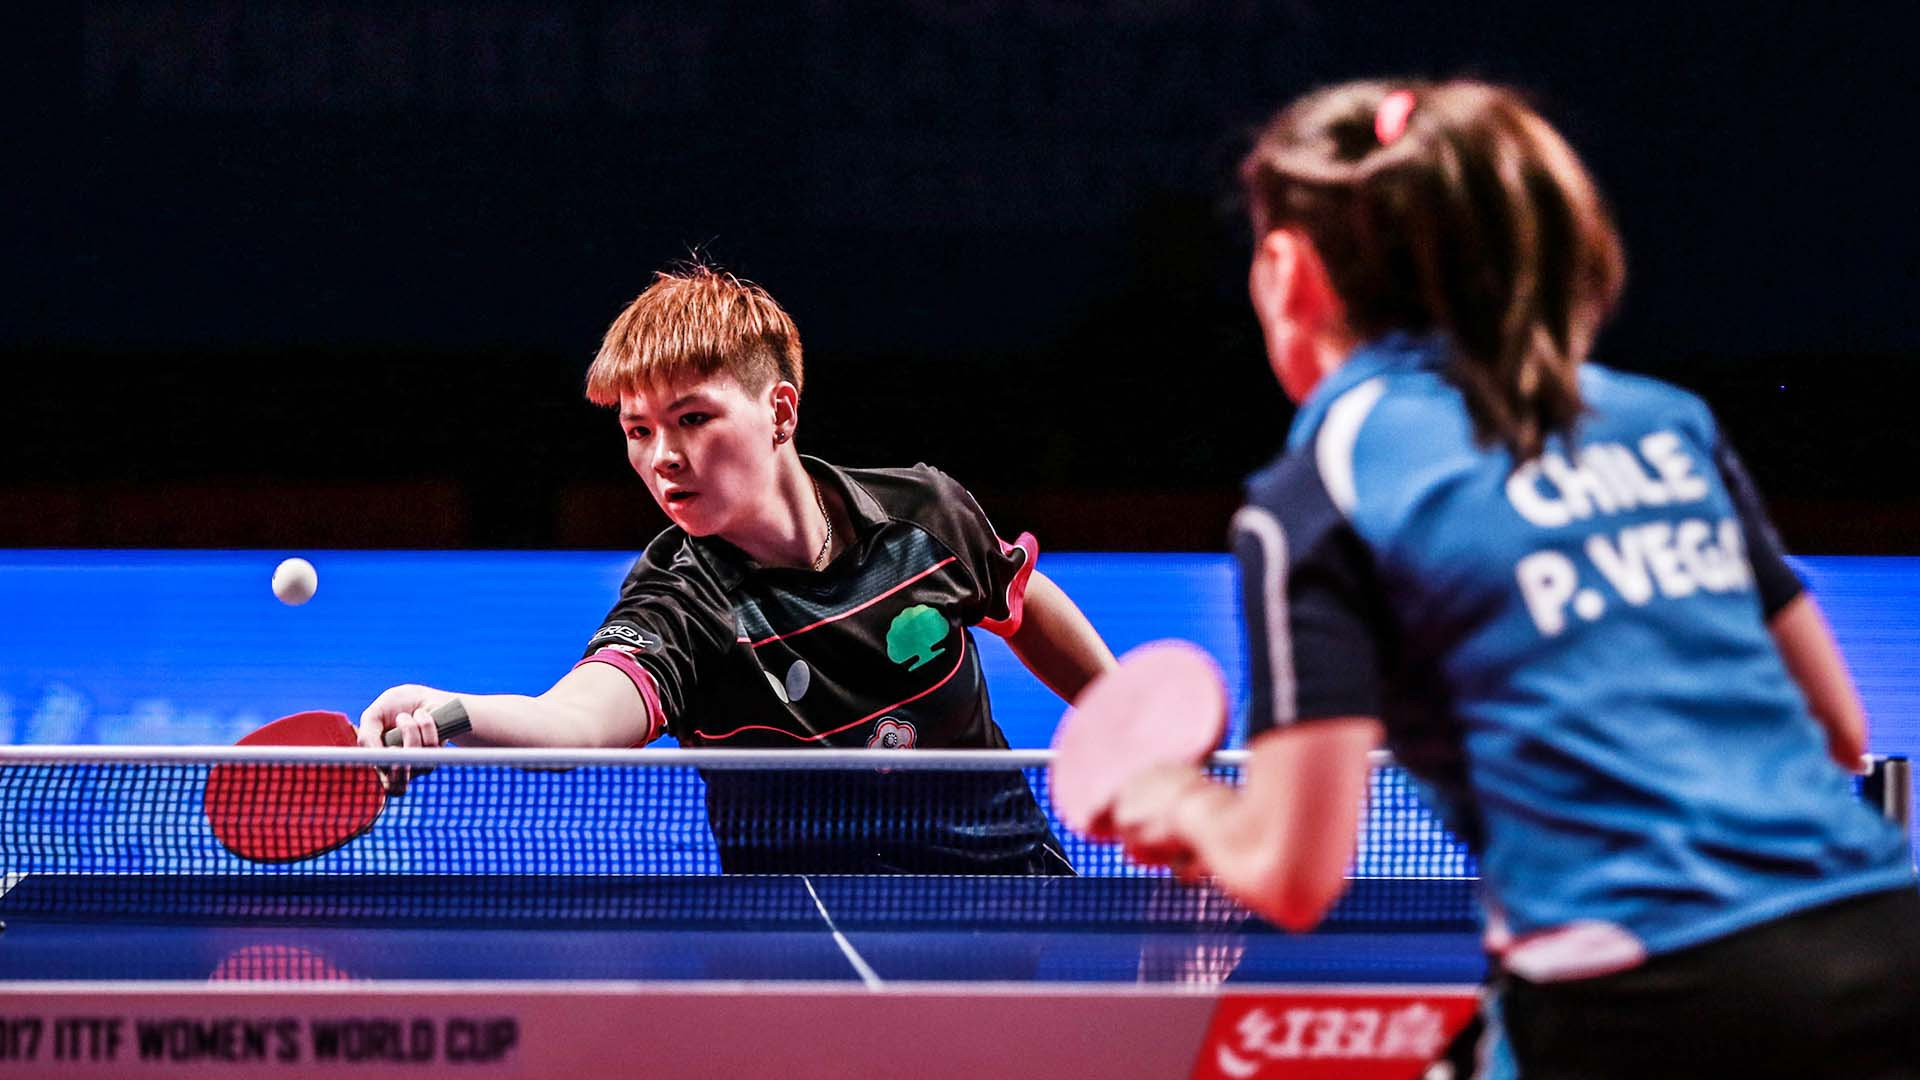 Chinese Taipei's Chen Szu-Yu registered victories in both her matches today ©ITTF/Organising Committee